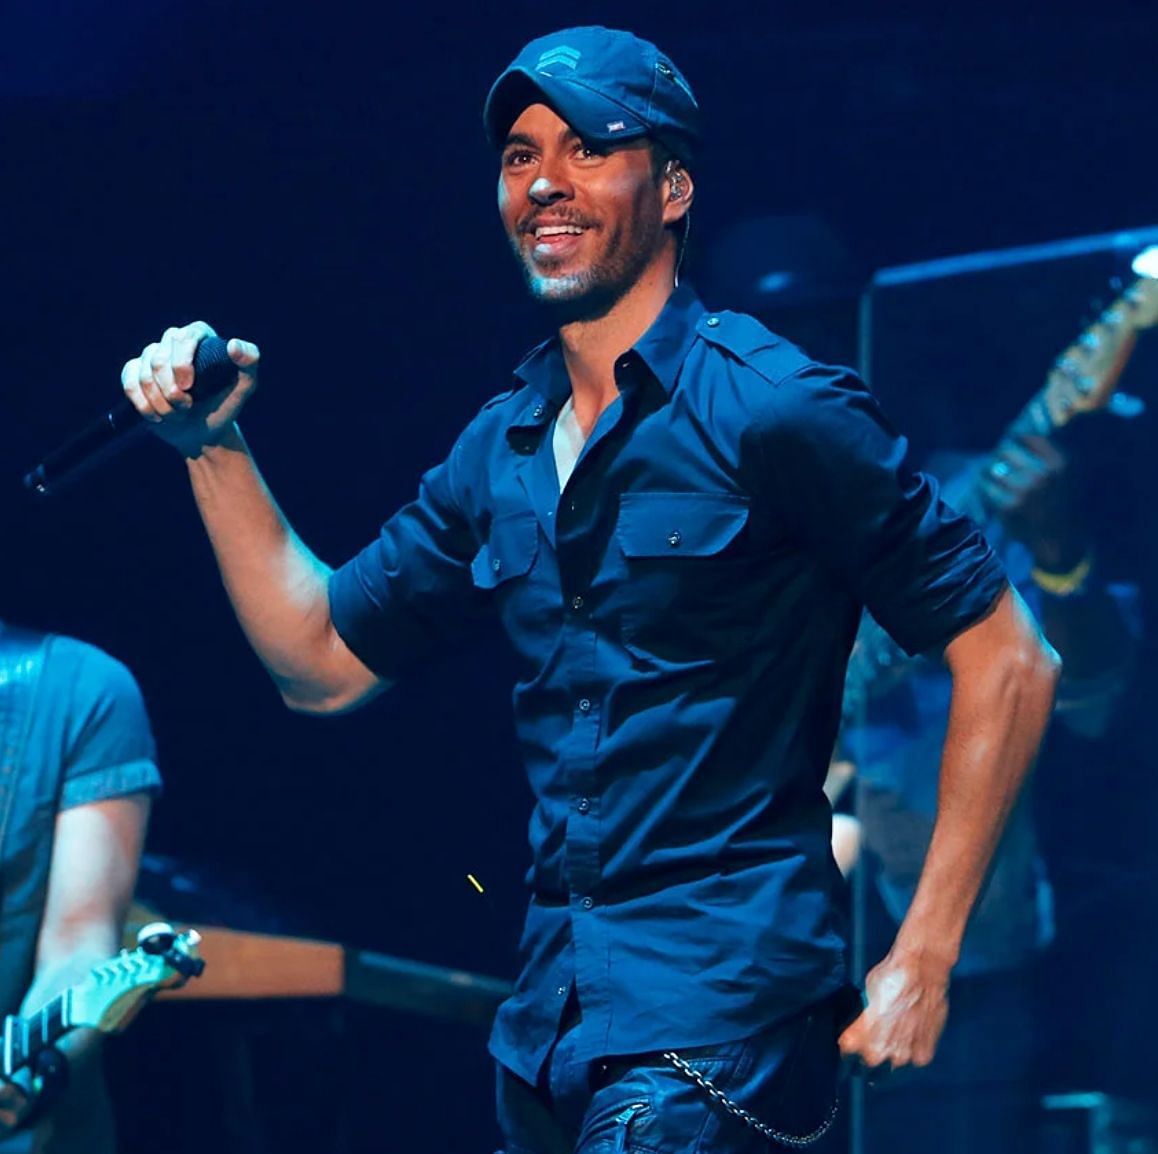 Enrique had previously noted that his upcoming album Final Vl 2 would be his last (Image via Steve Marcus/Getty Images)